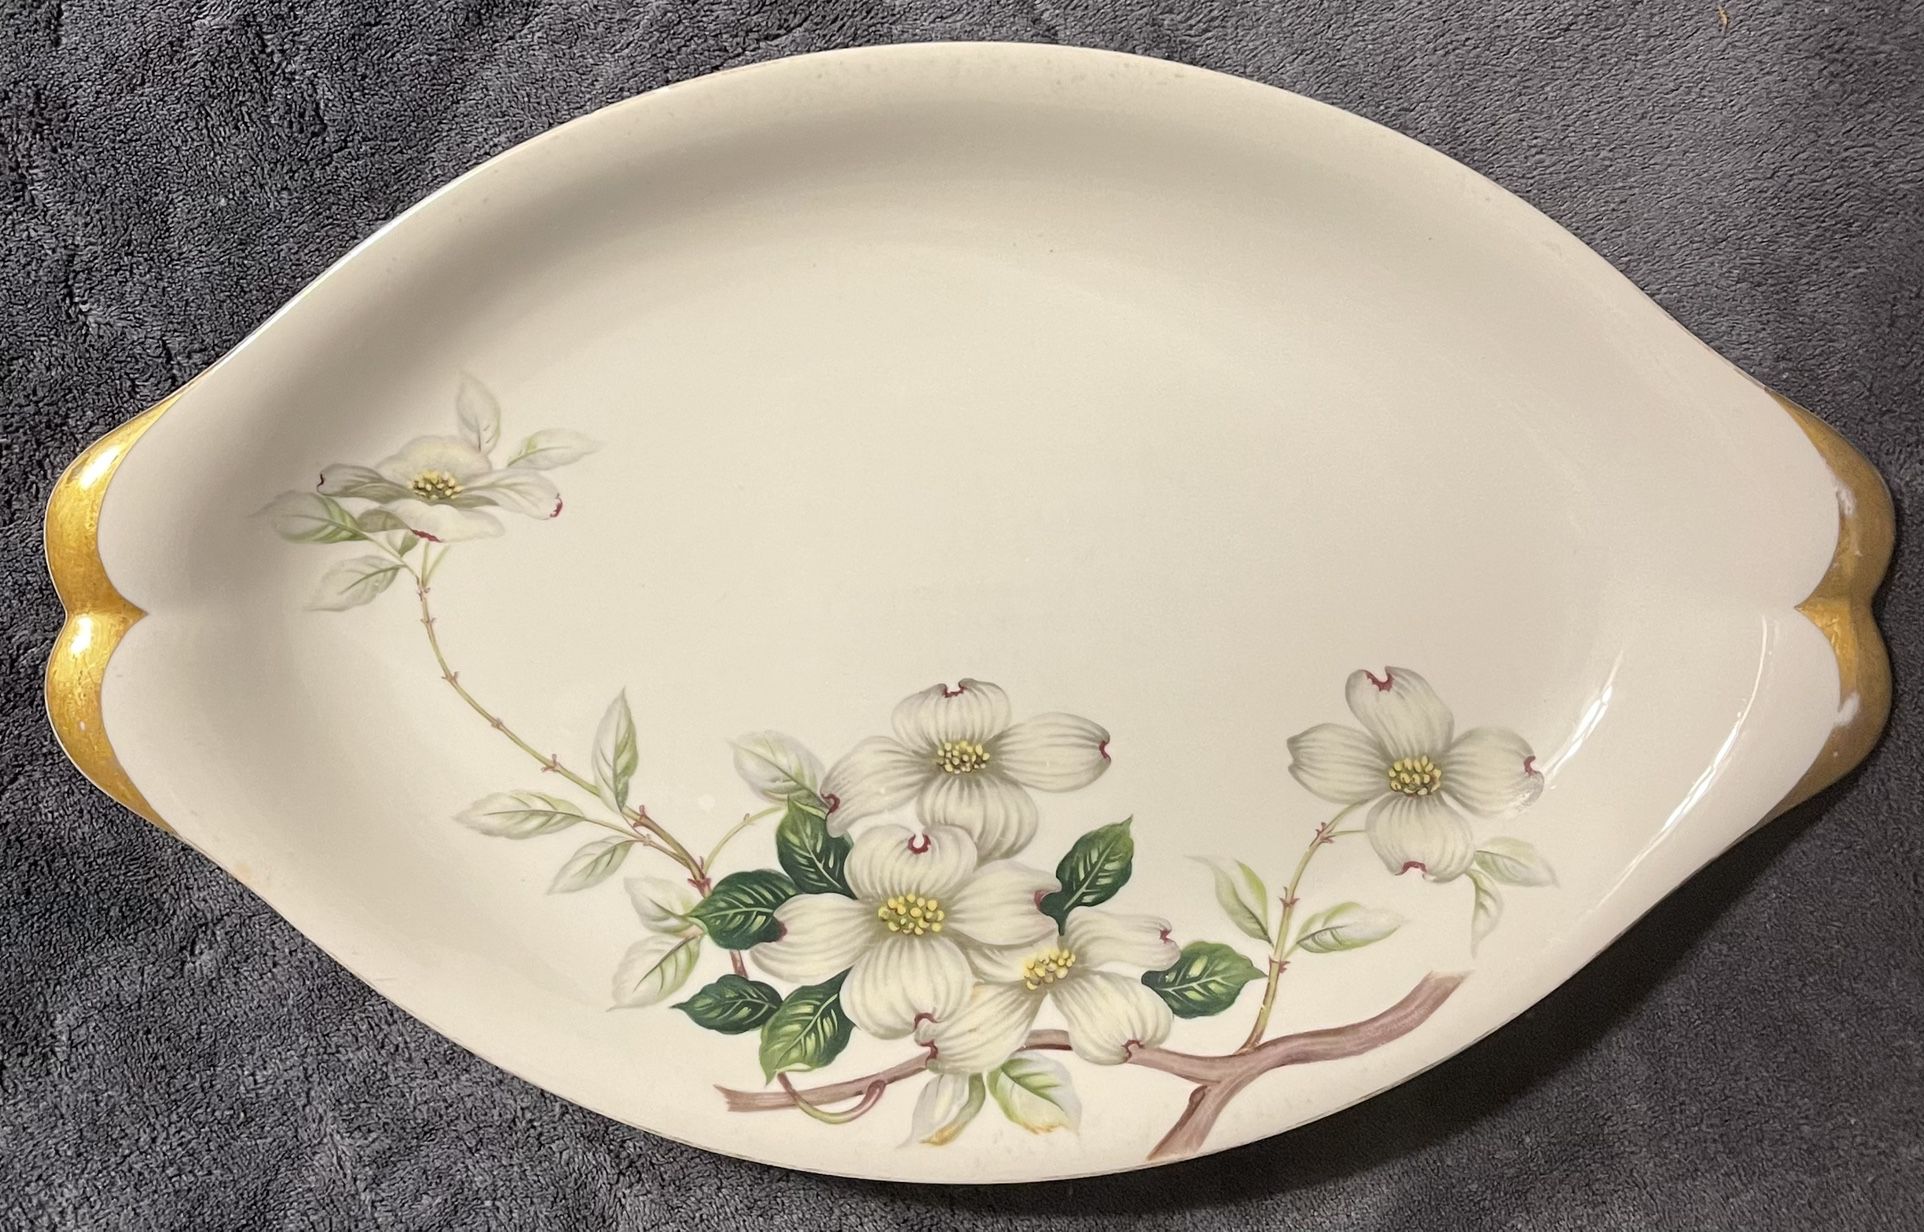 Vintage Meito Norleans China Livonia Dogwood Blossoms Oval Serving Platter Made in Occupied Japan. 